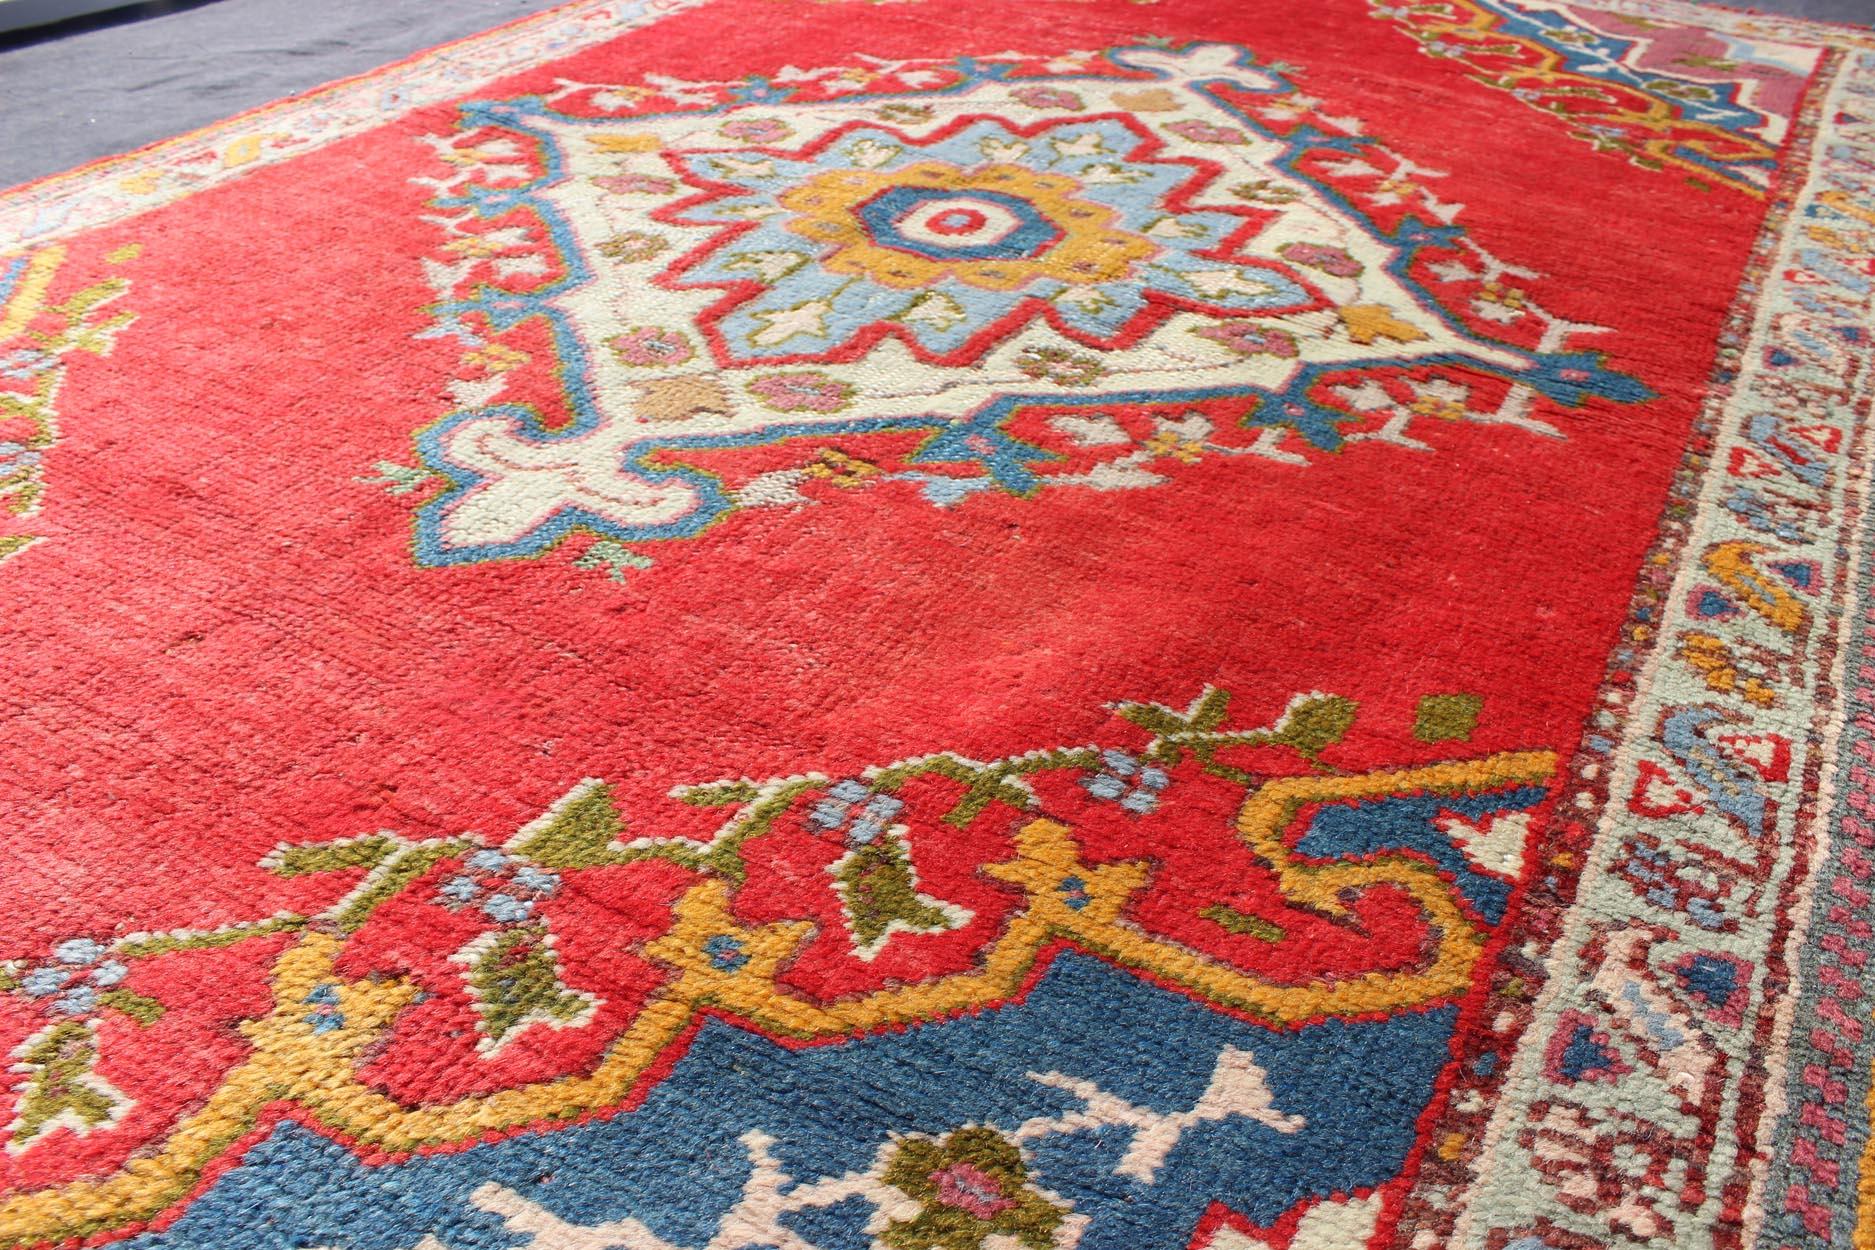 Early 20th Century Antique Turkish Oushak Small Rug in Red, Blue, Lavender, Orange & Green For Sale